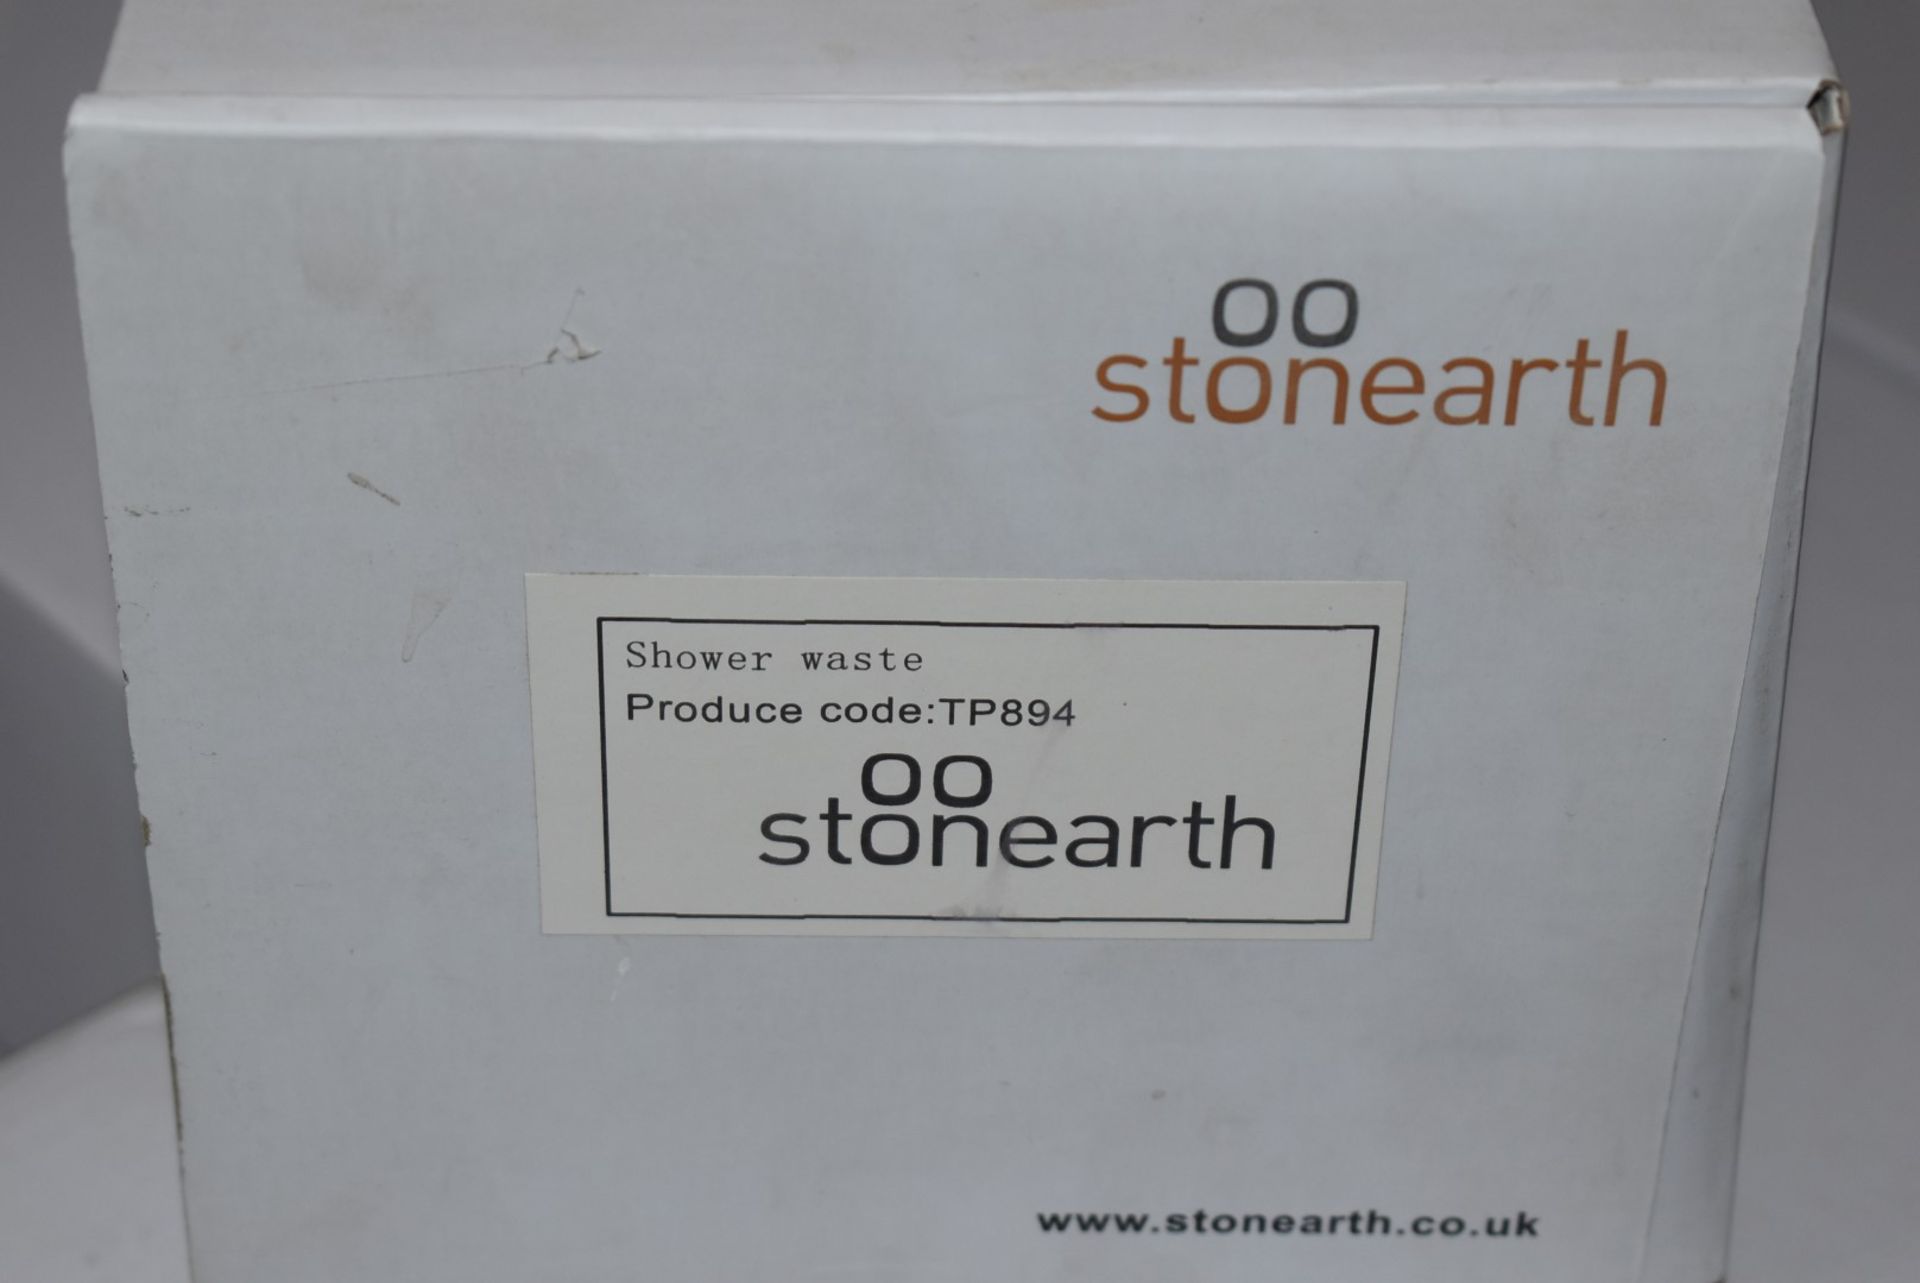 1 x Stonearth 'Metro' Stainless Steel Bath Filler Mixer Tap - Brand New & Boxed - RRP £340 - Ref: - Image 6 of 15